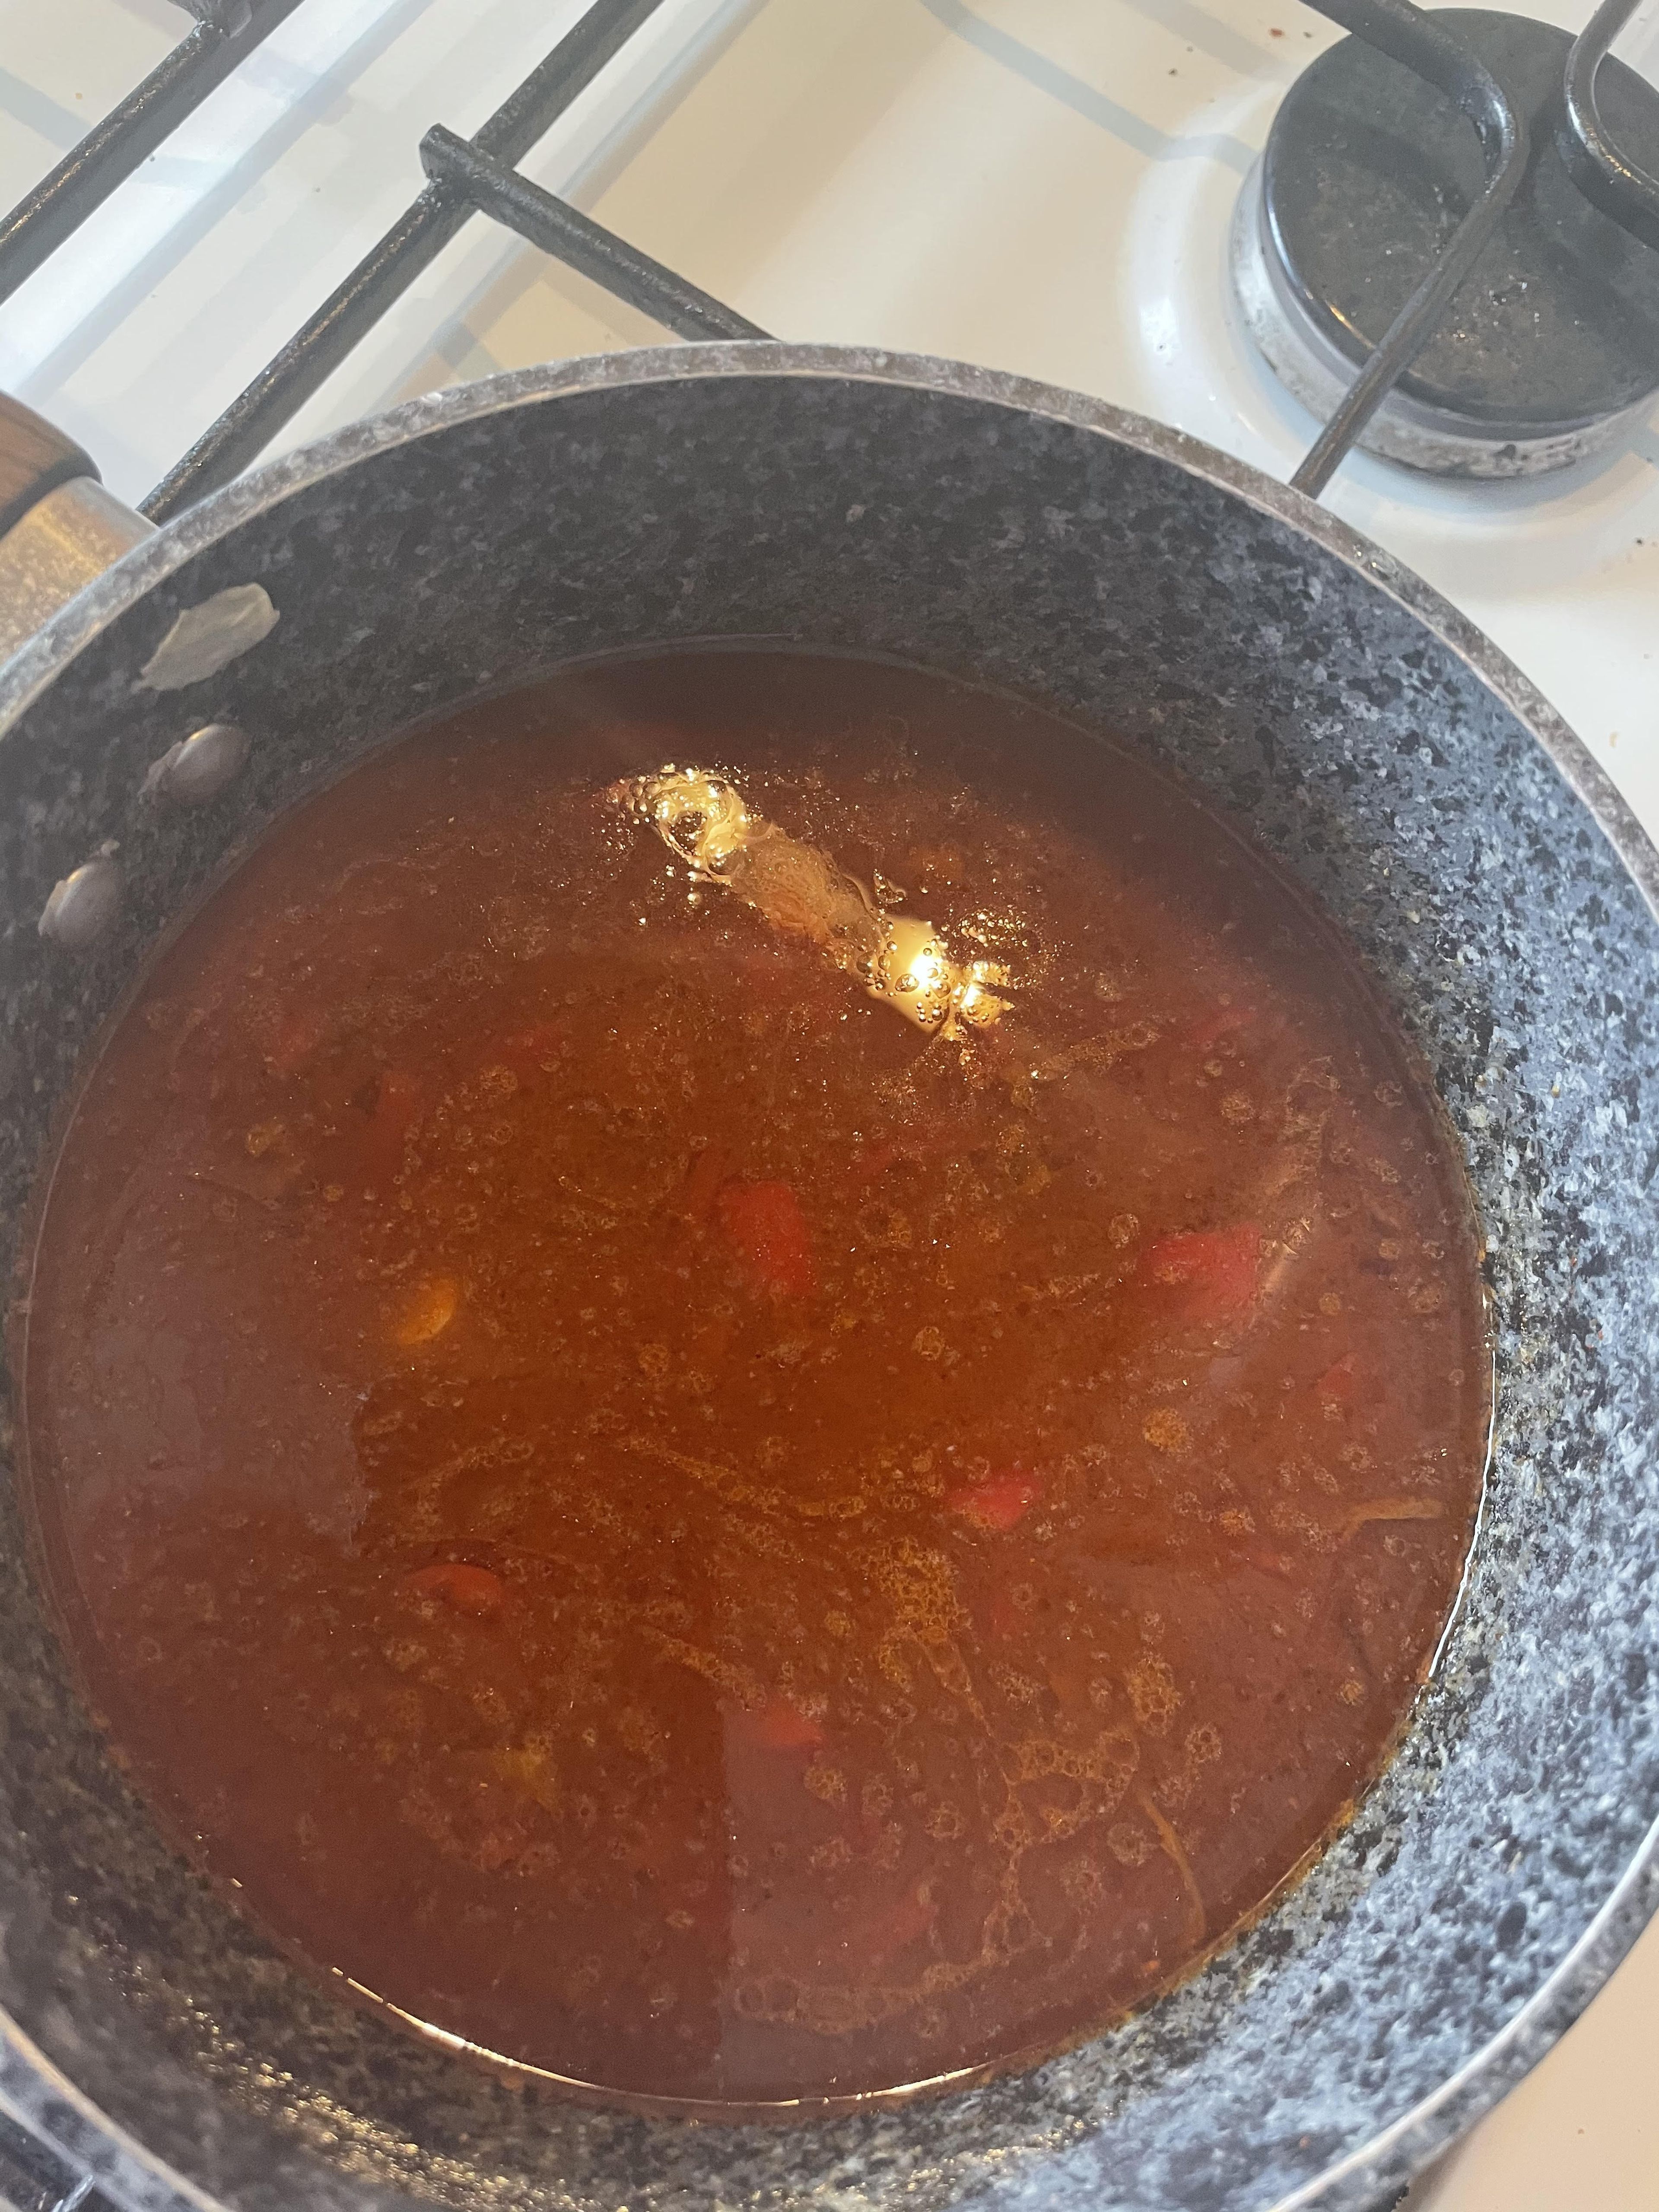 Once your all done frying the mixture, drop it into 150ml of cold water soon as you take it off the heat and mix it all together and then set this off to the side.